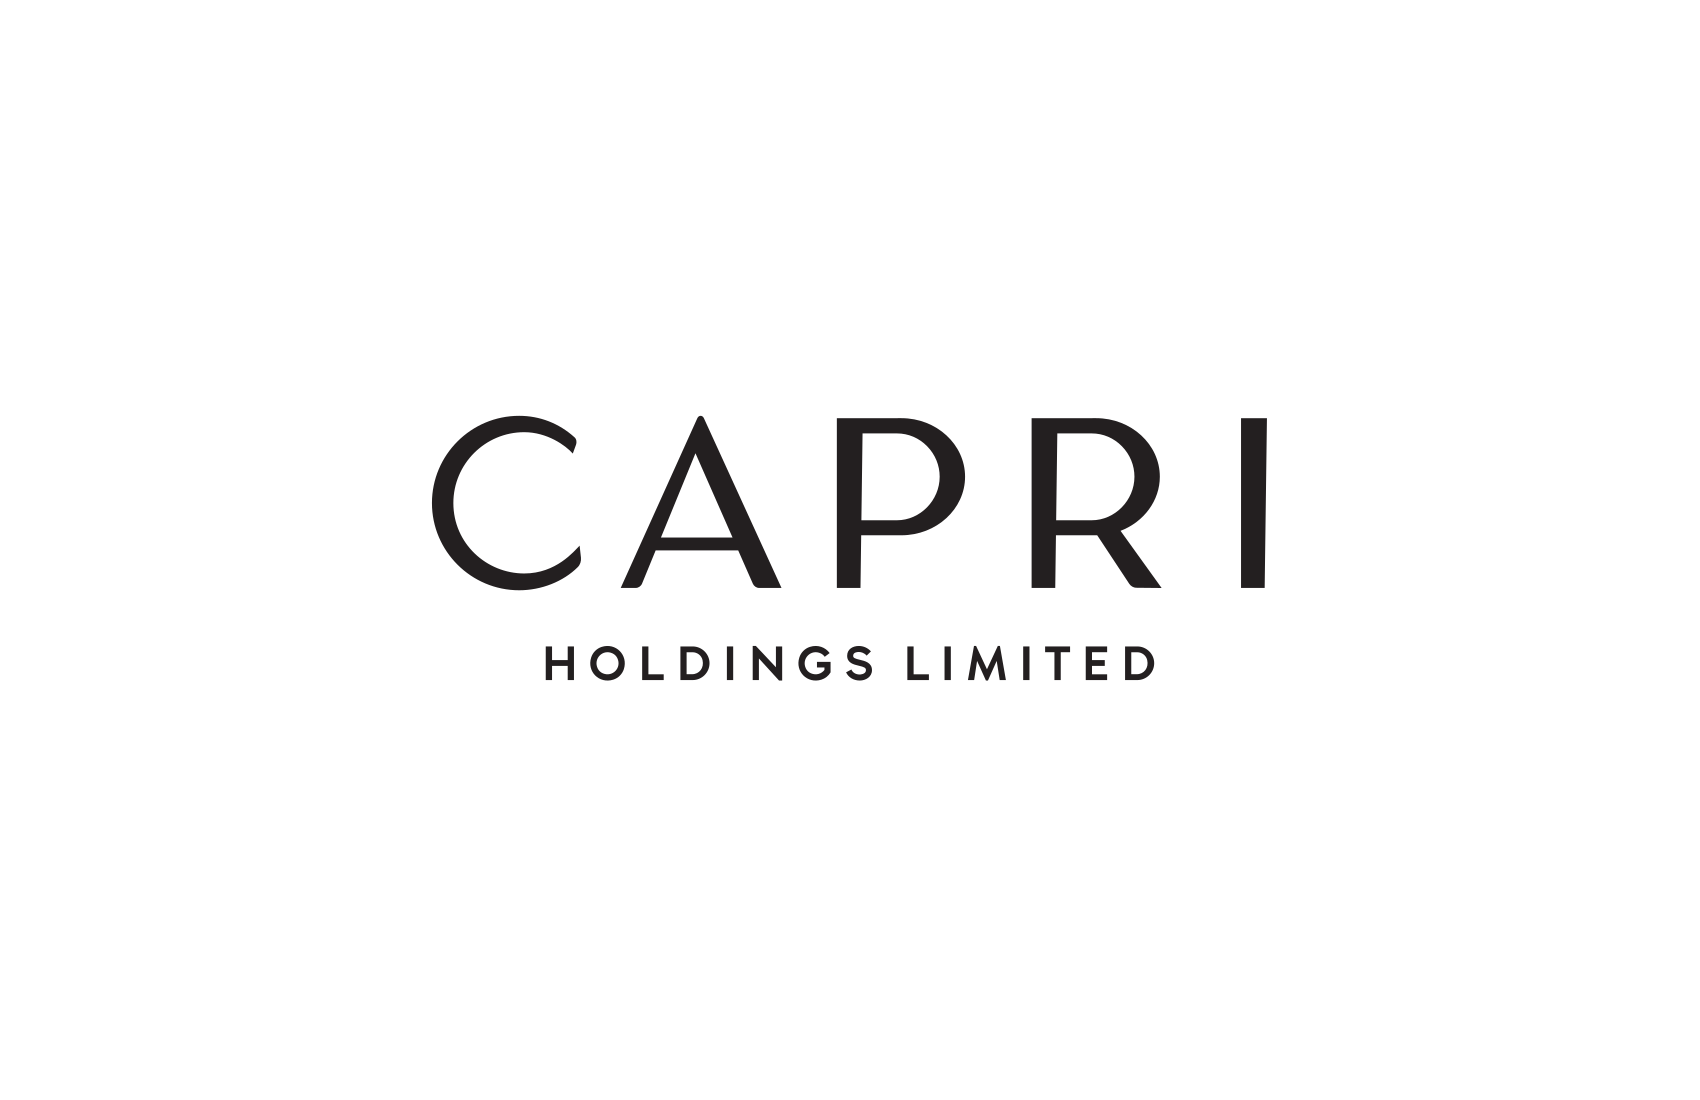 The Limited Logo - Capri Holdings Limited - Overview